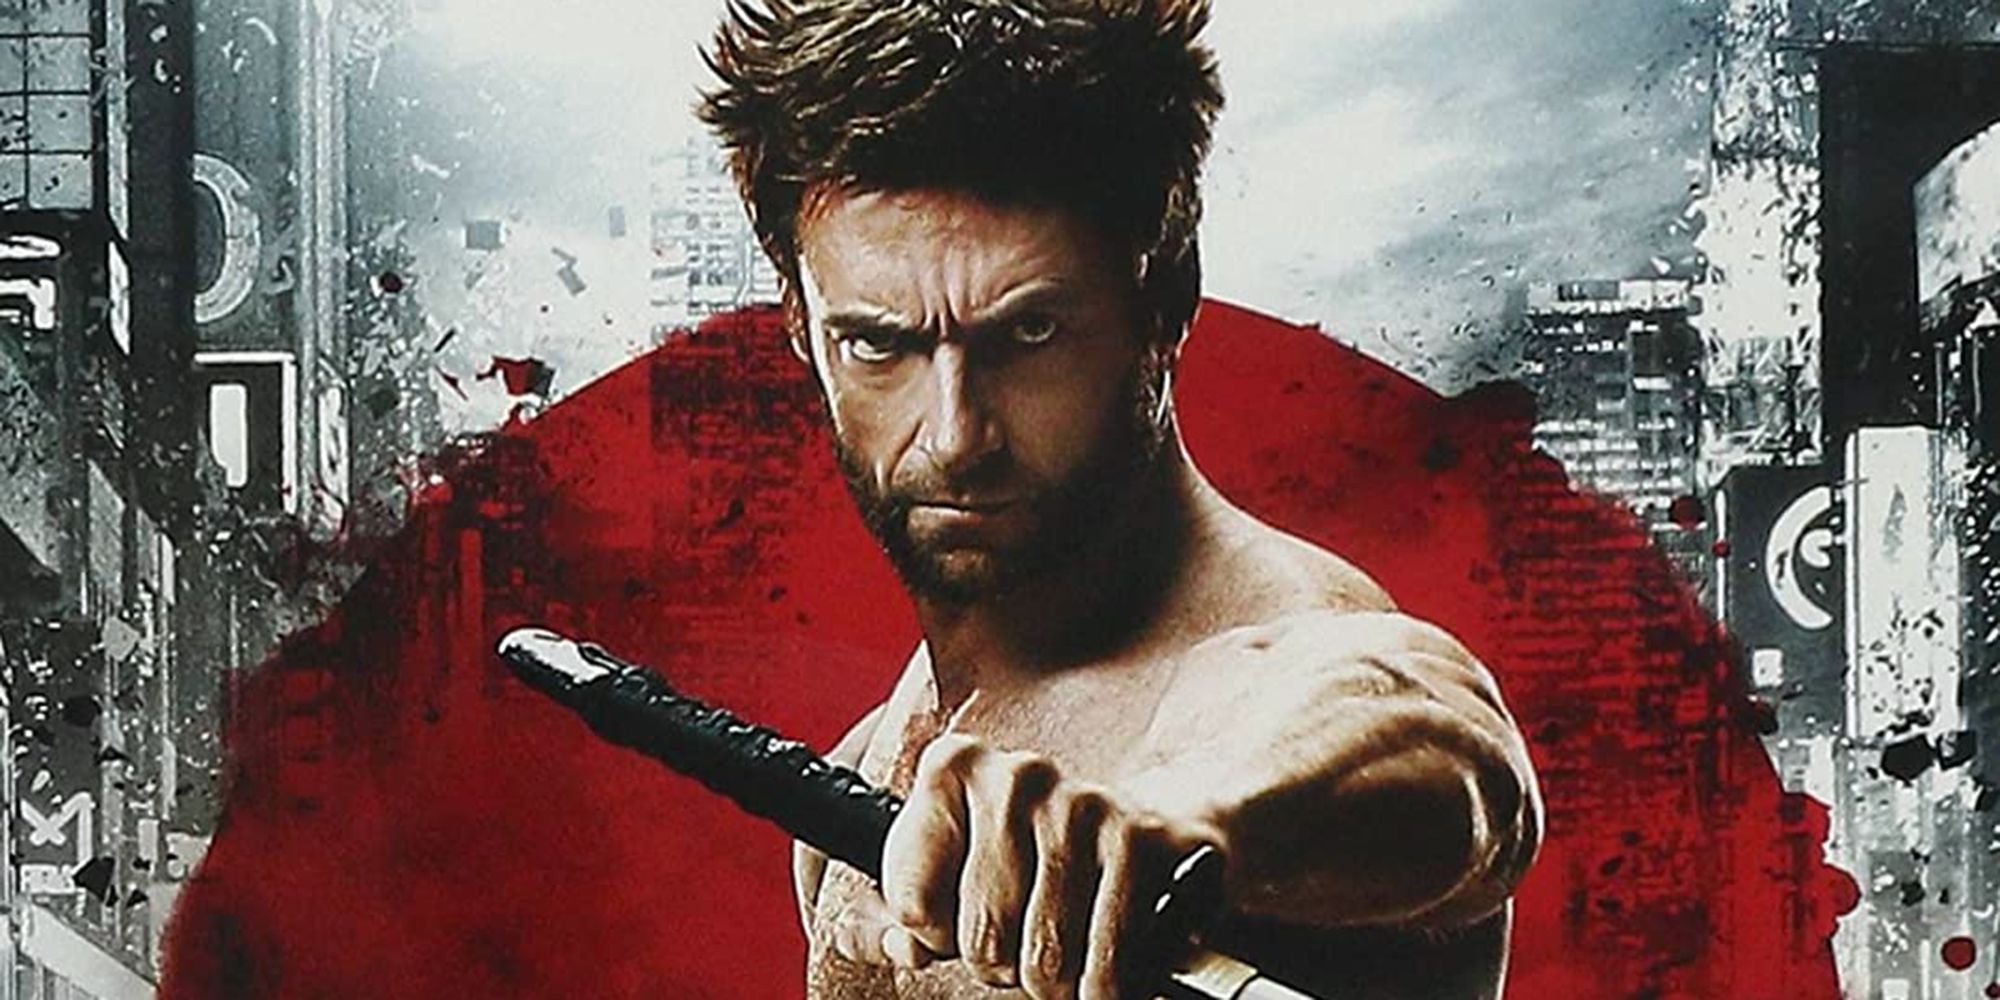 Poster for The Wolverine